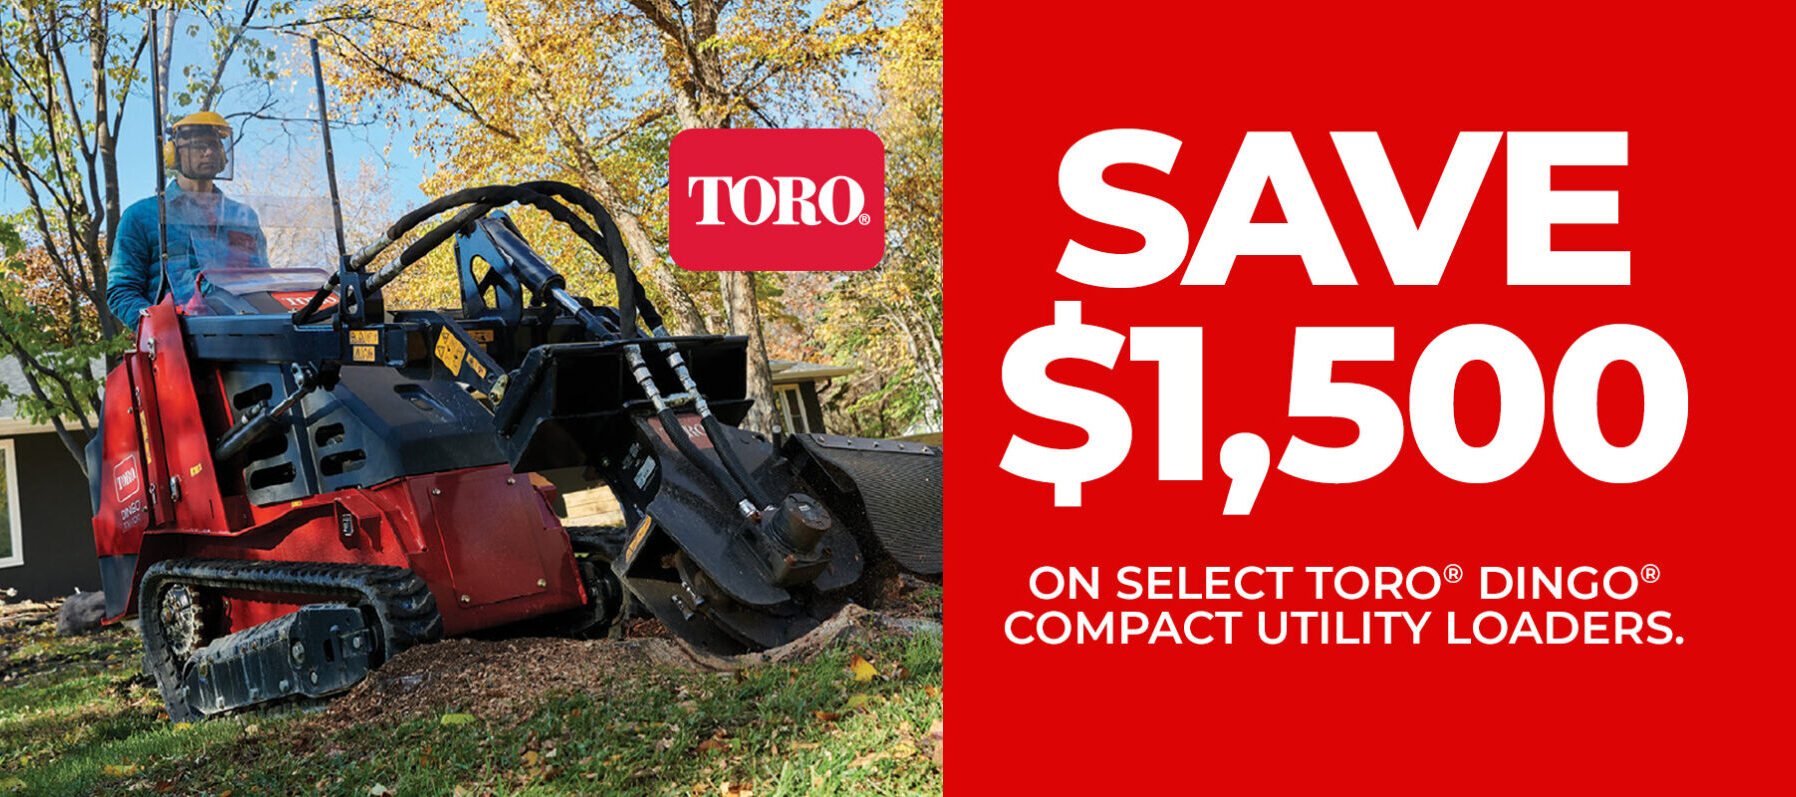 Rebate offer on new Toro Dingo compact utility loaders